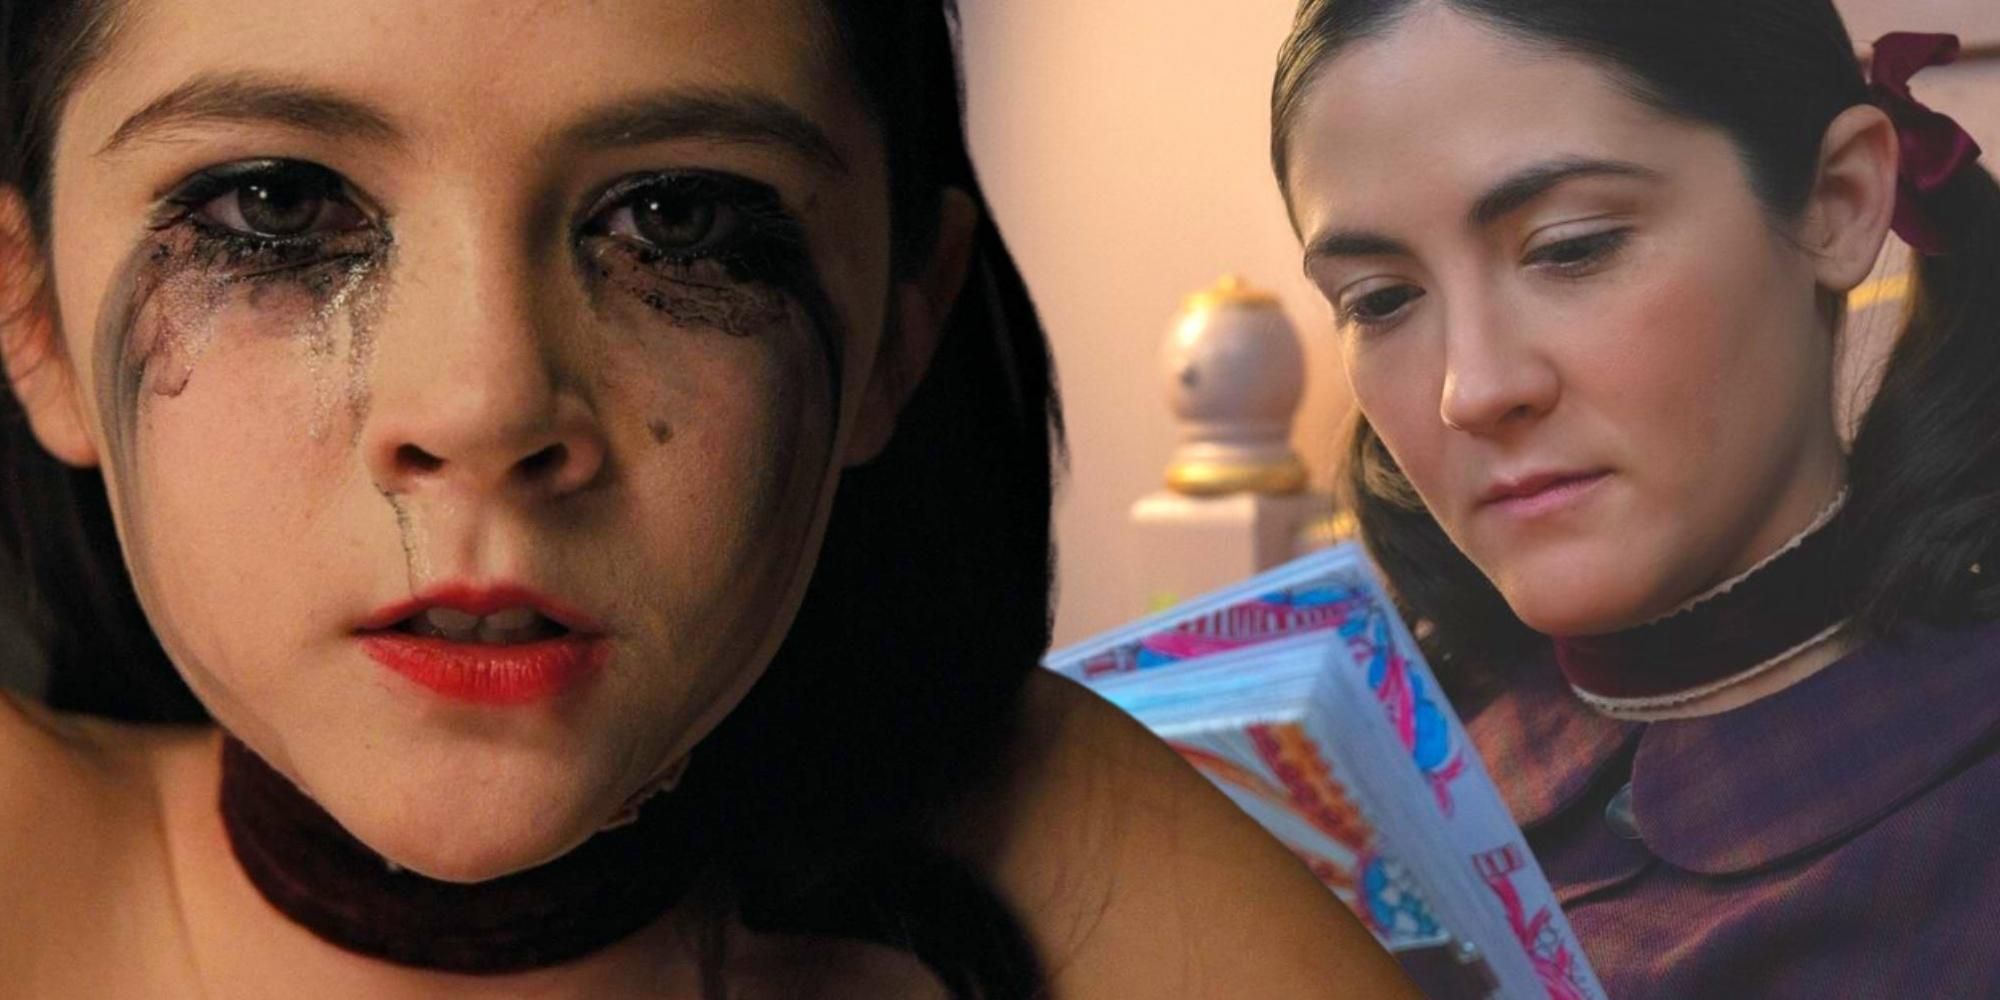 Isabelle Fuhrman as Esther / Leena in Orphan and Orphan: First Kill